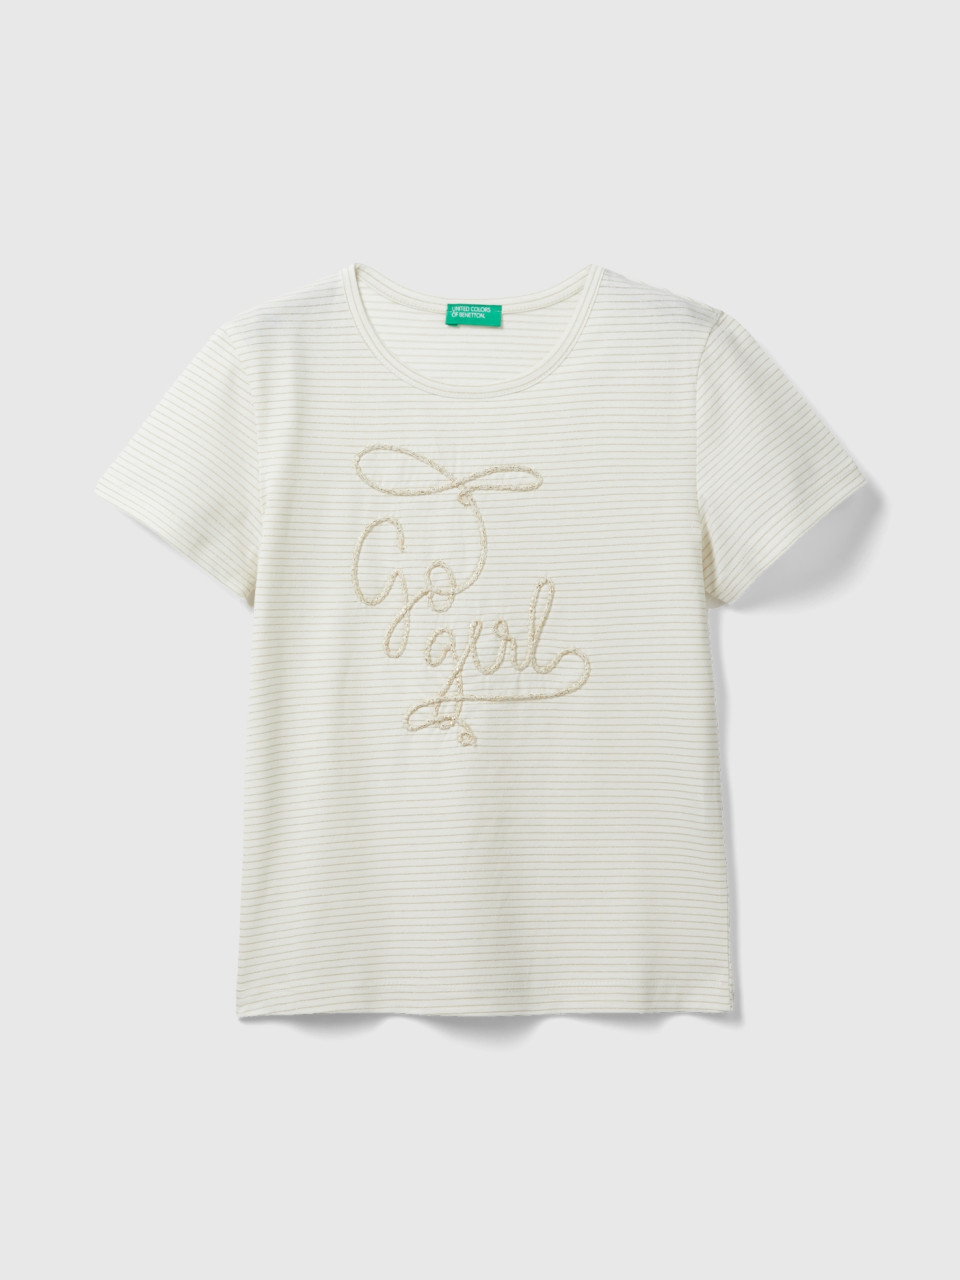 Benetton, T-shirt With Cord Embroidery, Creamy White, Kids